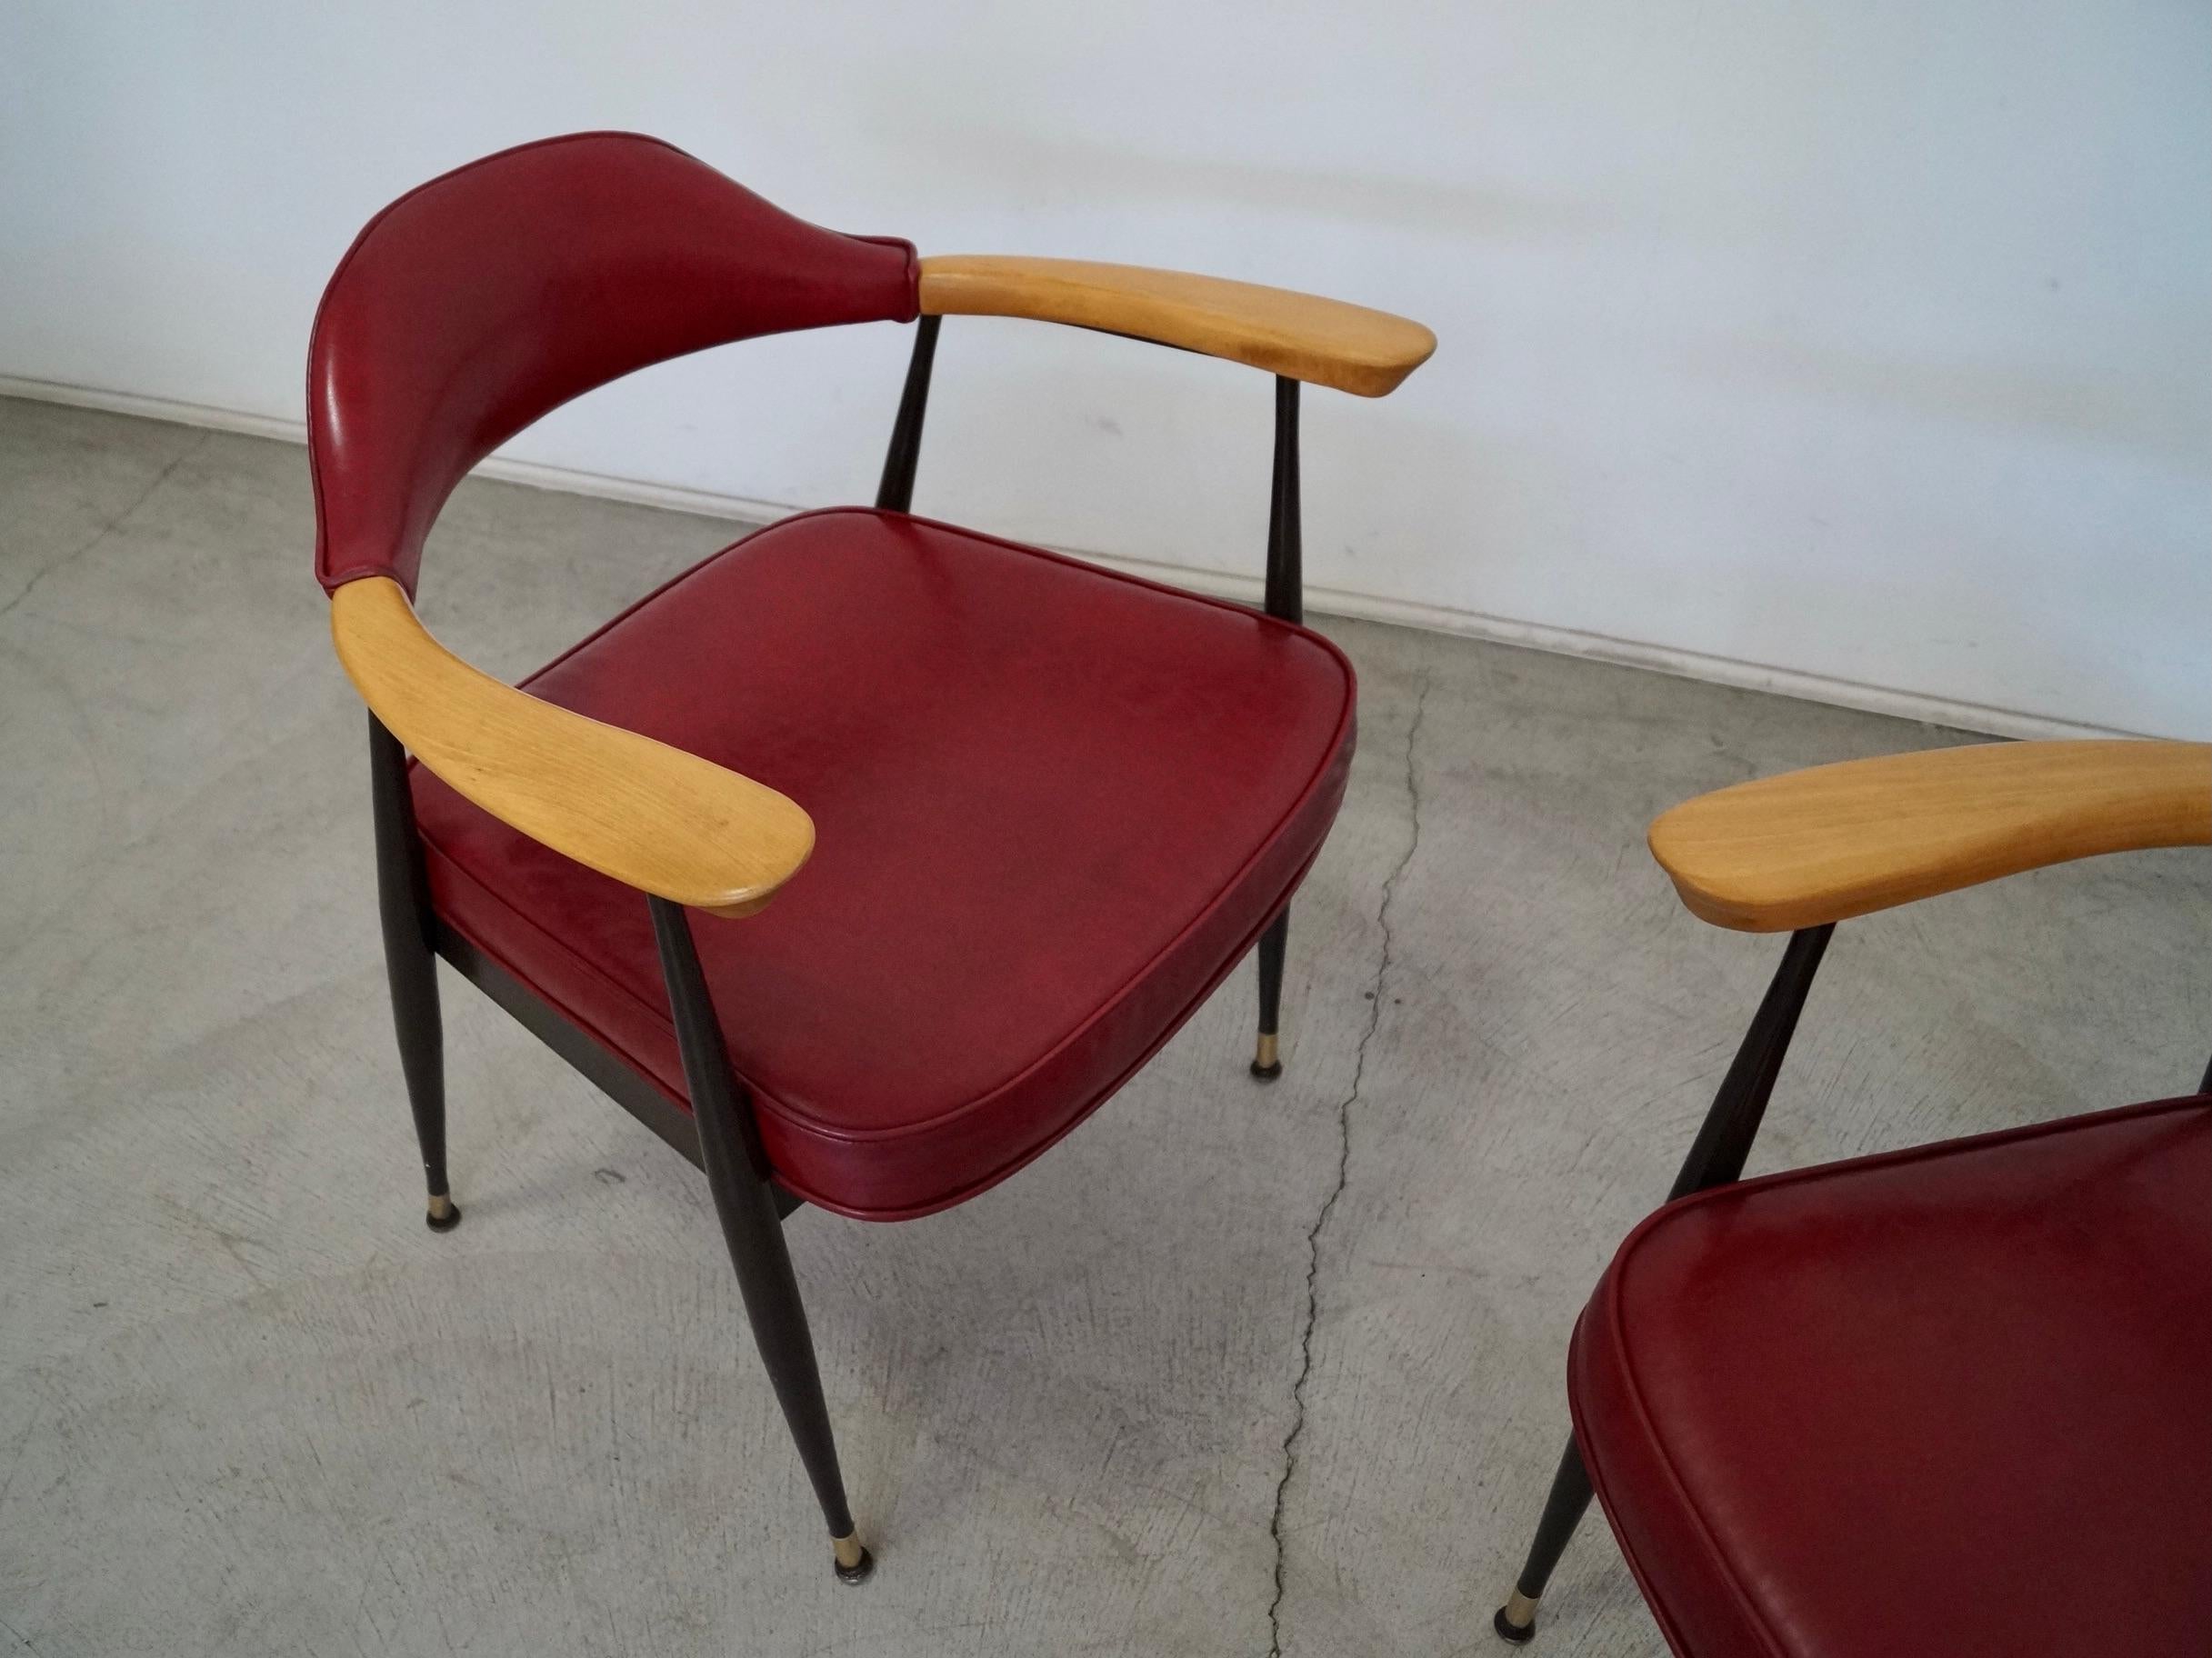 1970's Mid-Century Modern Metal & Wood Armchairs - a Pair For Sale 6